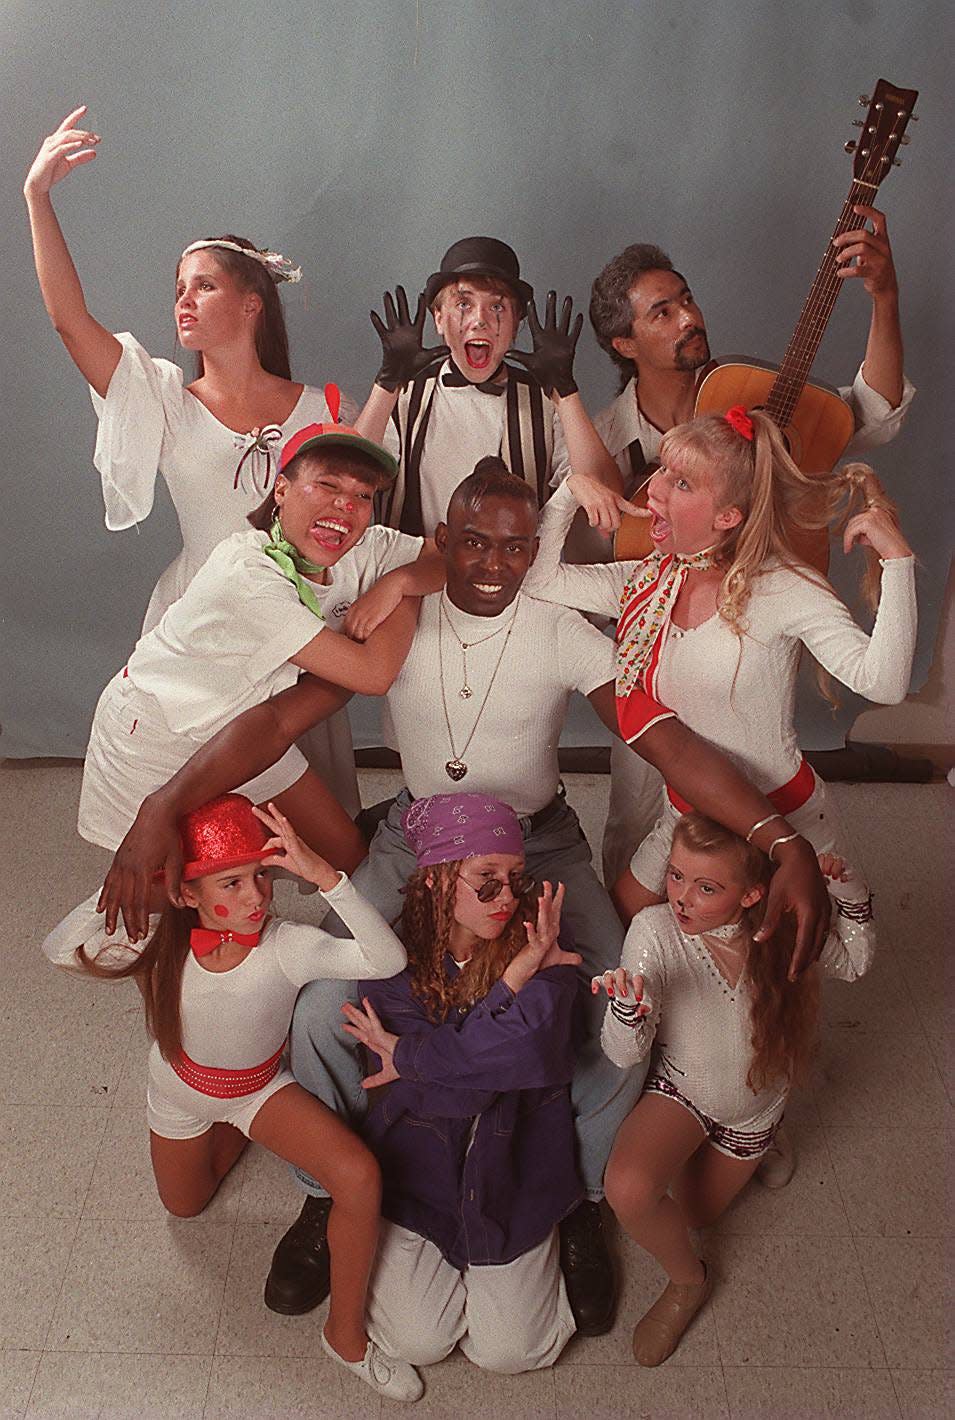 Joolie Davis, Jane Wall, George Brittain, Erica Pringle, Thym Kennedy, Corie Hammonds, Jessica Bongiorno, Jessica Taube and April Ingraham pose during a production in the 1990s.